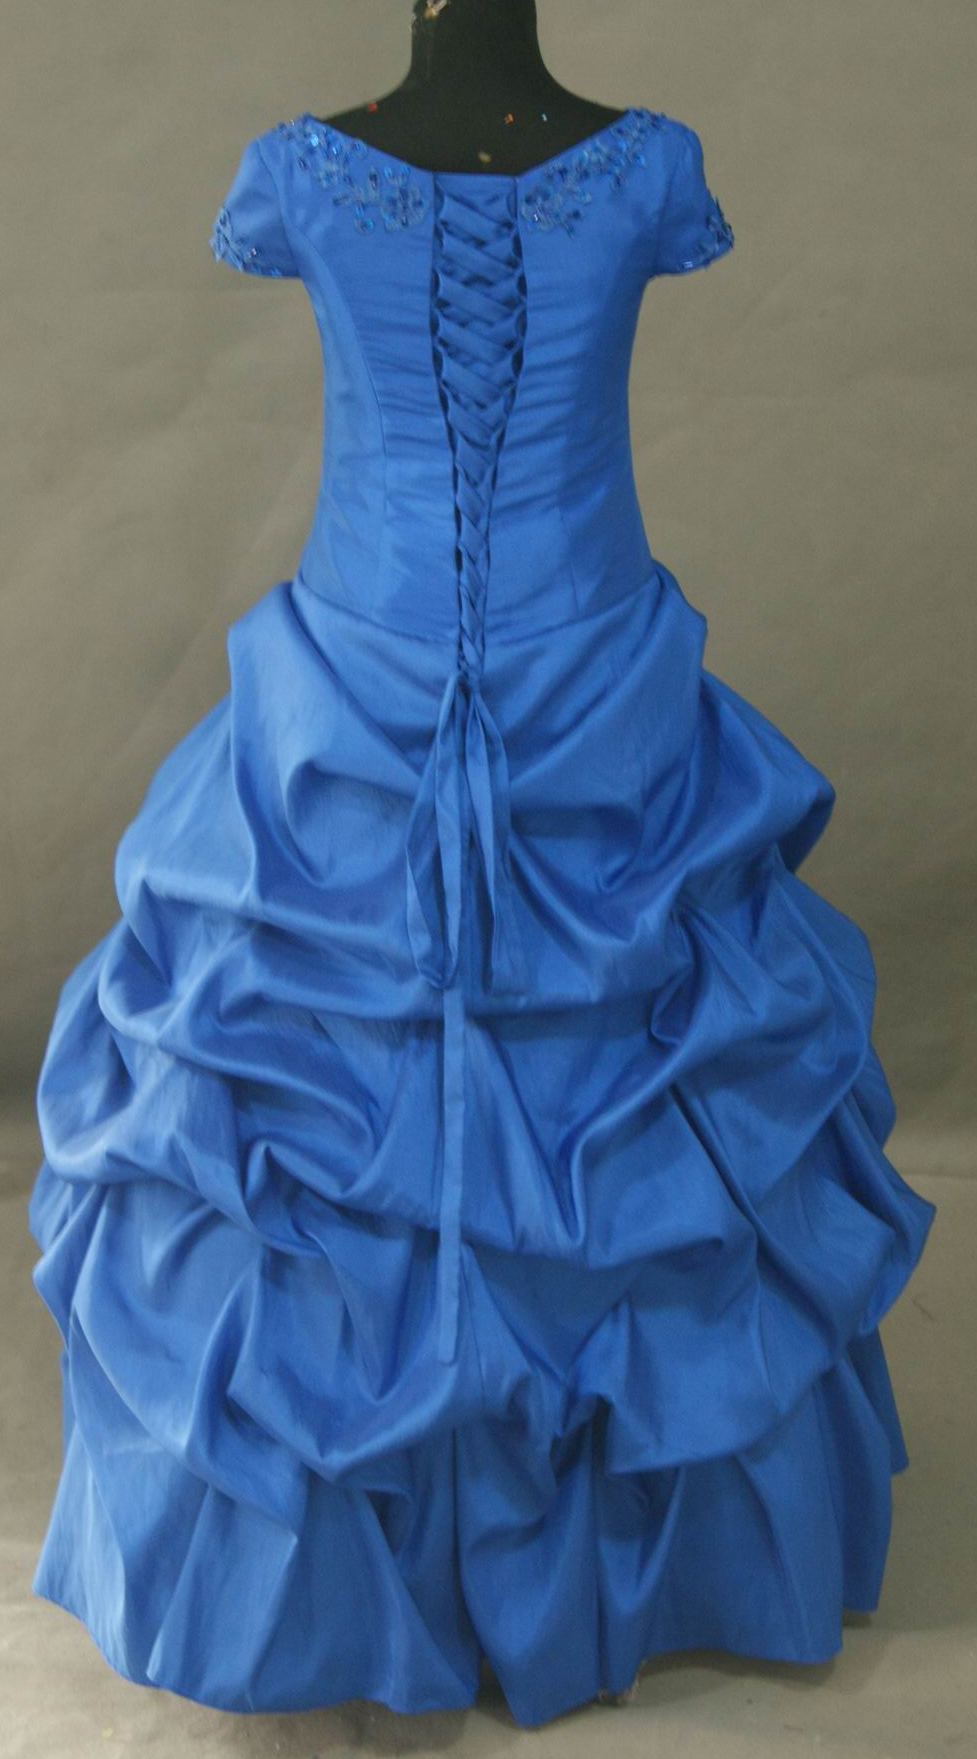 Childrens party dresses - ball gown gathered skirt.